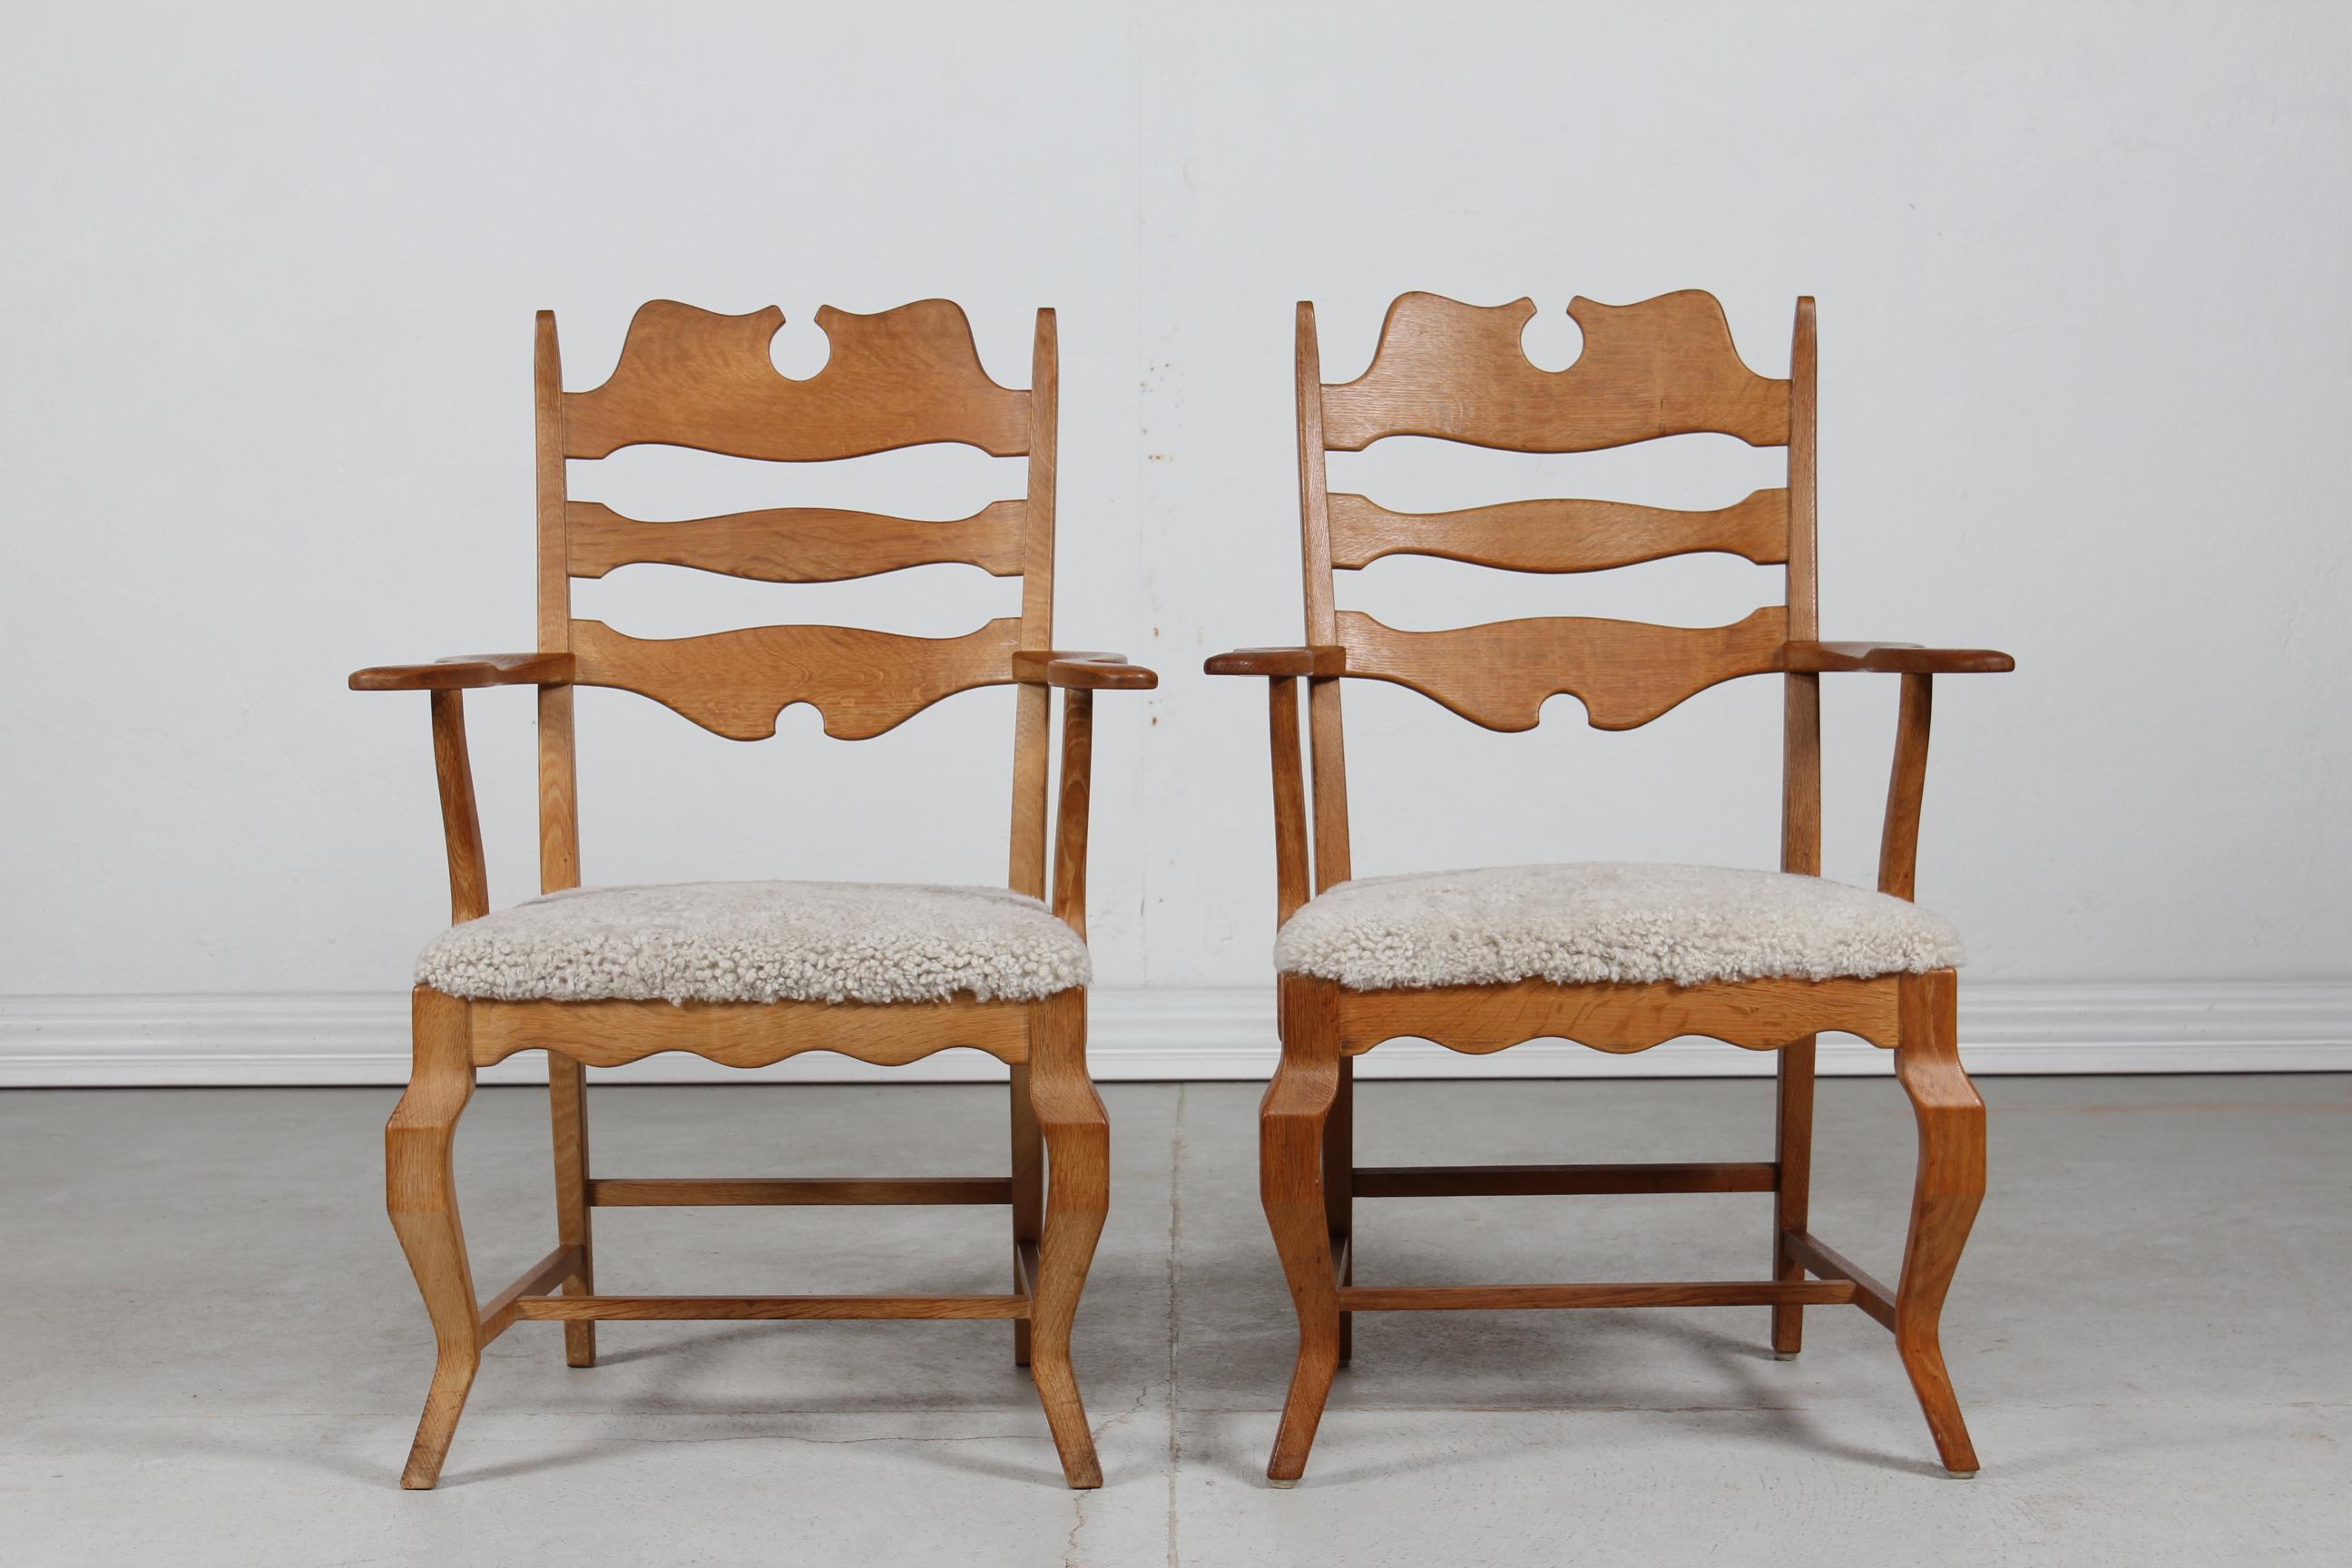 A pair of Danish vintage Henning Kjærnulf razor blade armchairs manufactured by EG Furniture in Denmark.

The chairs are made of solid patinated oak with high backrest. The seats are upholstered with new sheepskin which is very comfortable to sit